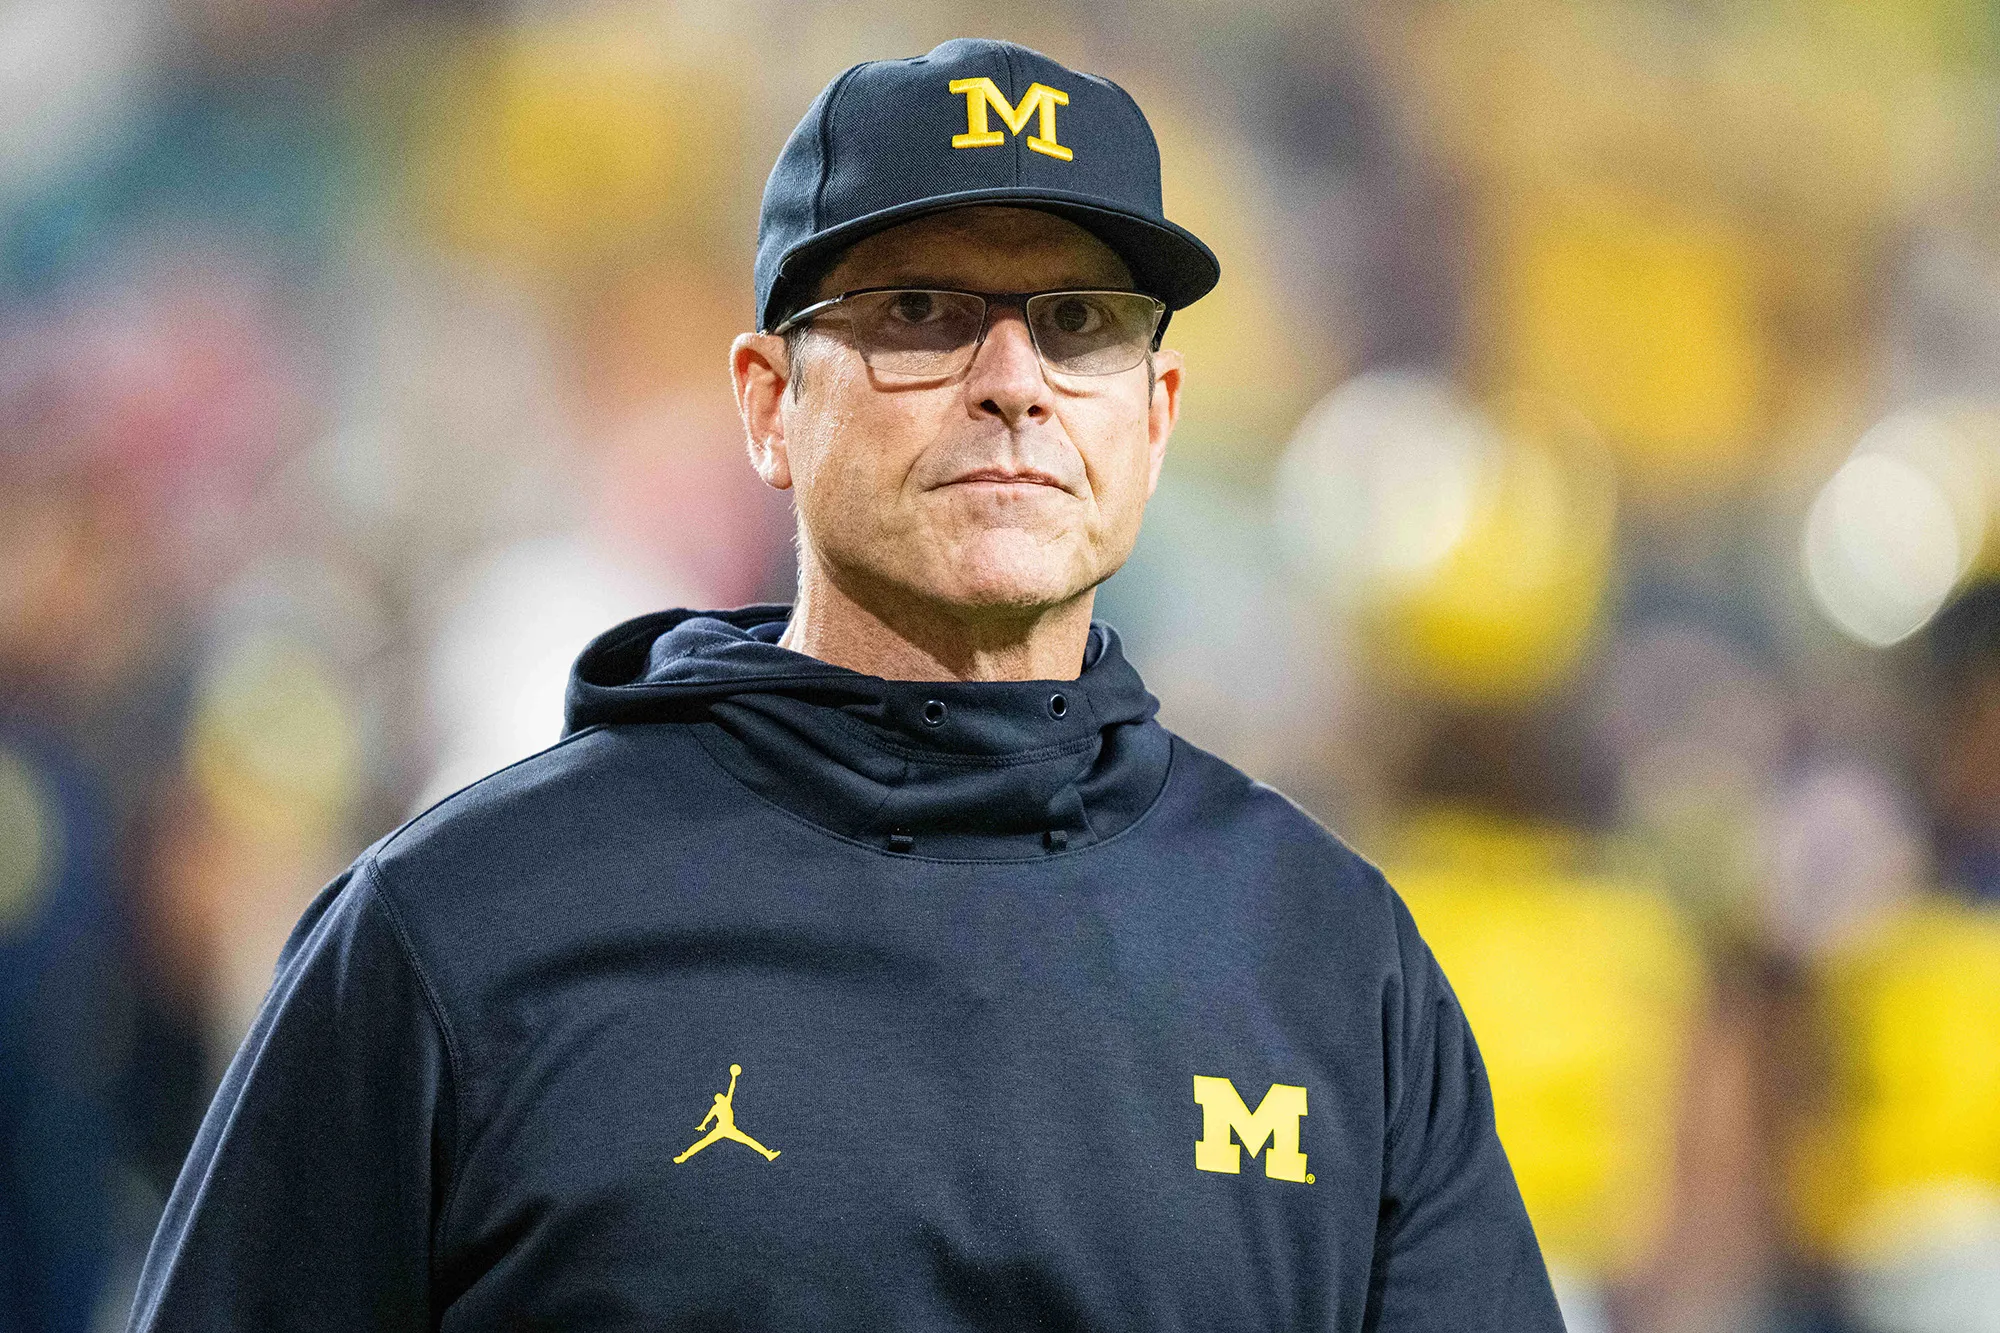 Who Is Jim Harbaugh? Biography And Age